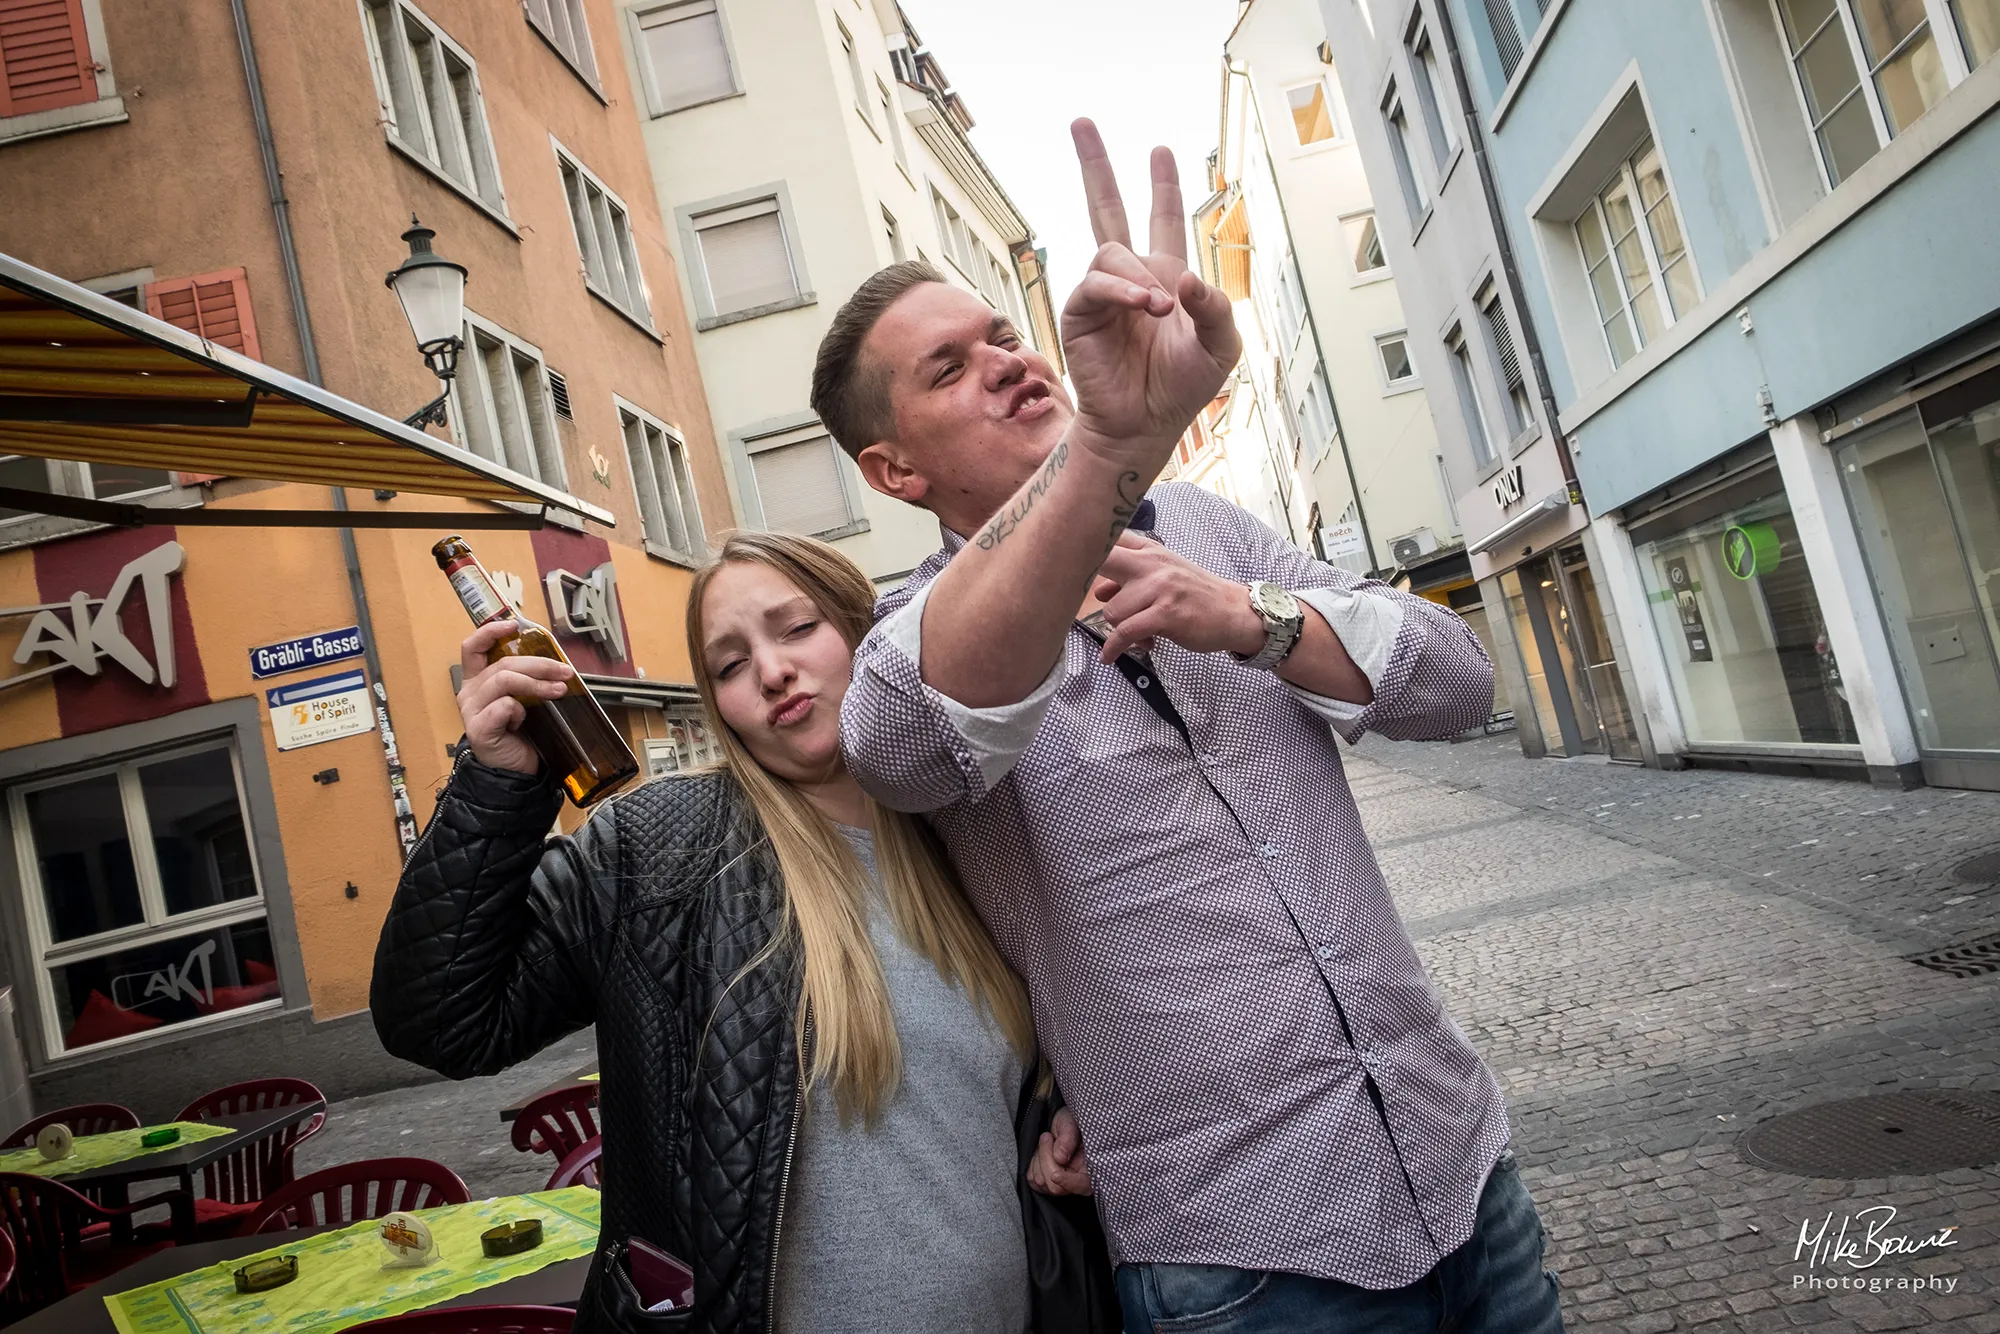 Young woman and man party goers raising a bottle in Zurich